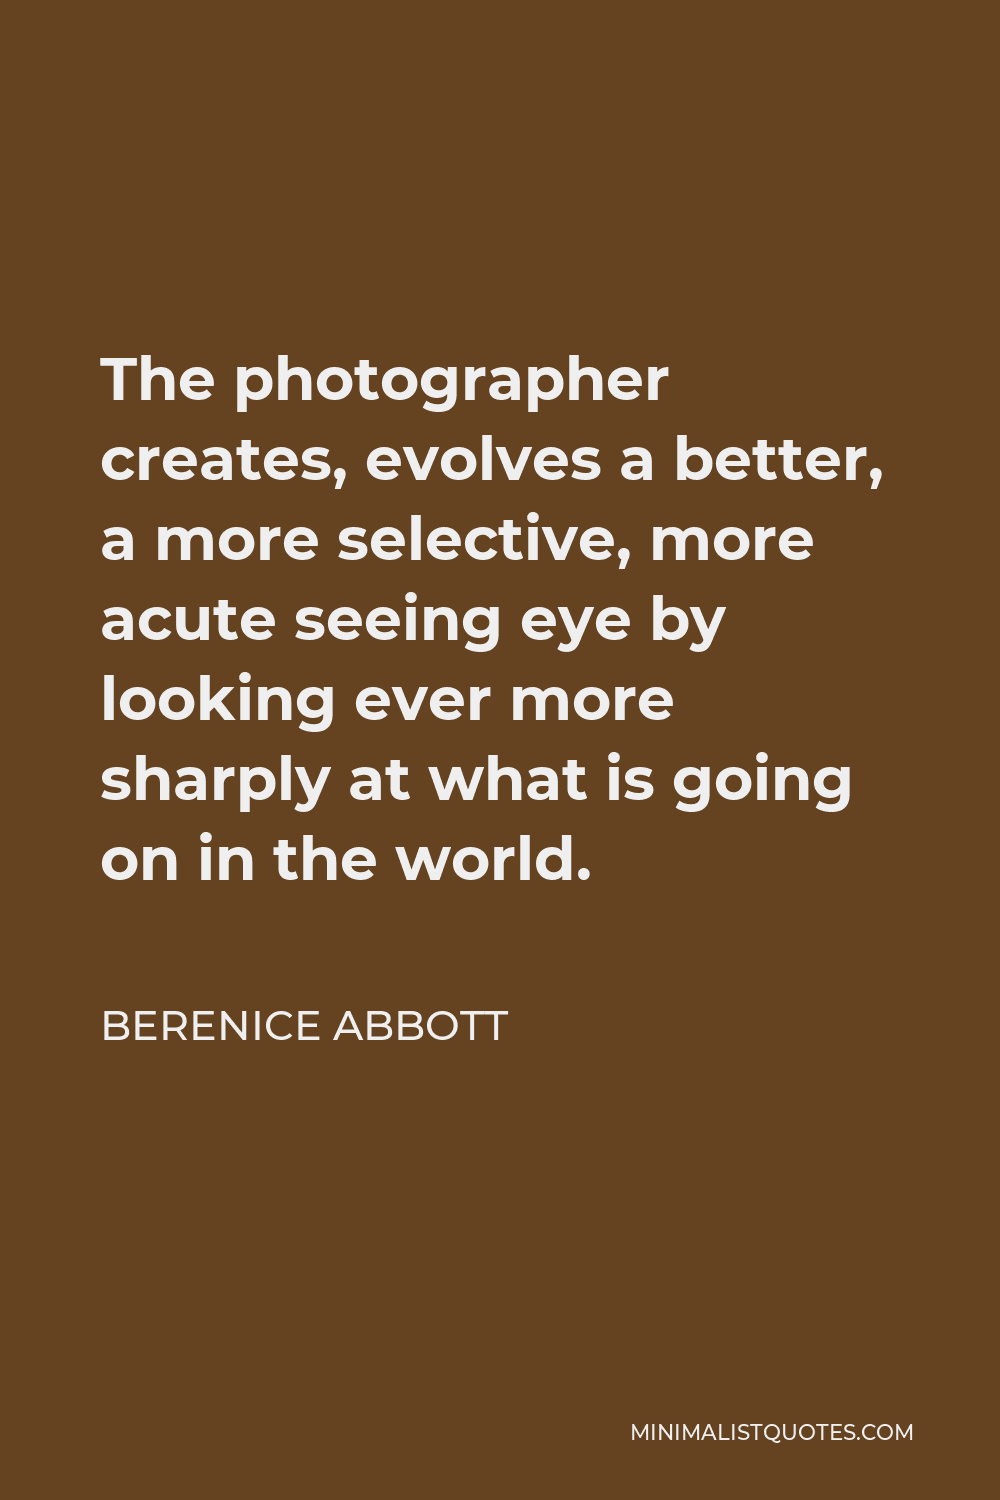 Berenice Abbott Quote - The photographer creates, evolves a better, a more selective, more acute seeing eye by looking ever more sharply at what is going on in the world.